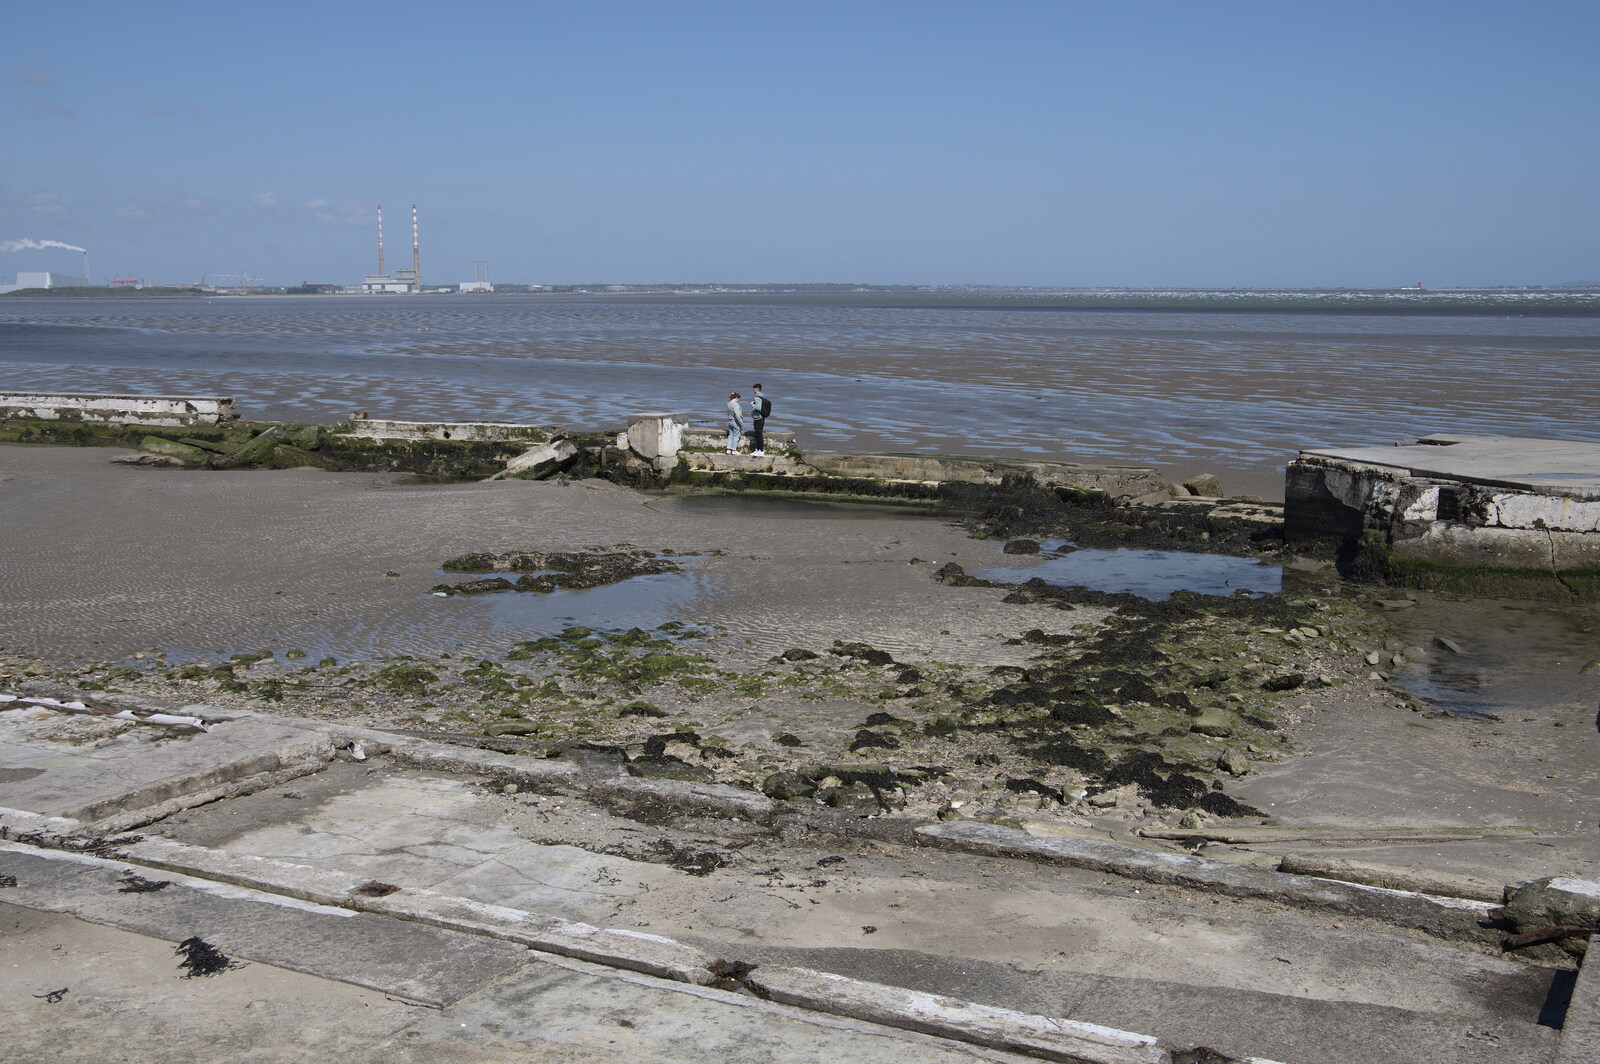 Blackrock North and South, Louth and County Dublin, Ireland - 23rd April 2022: The increasingly-derelict Blackrock Lido